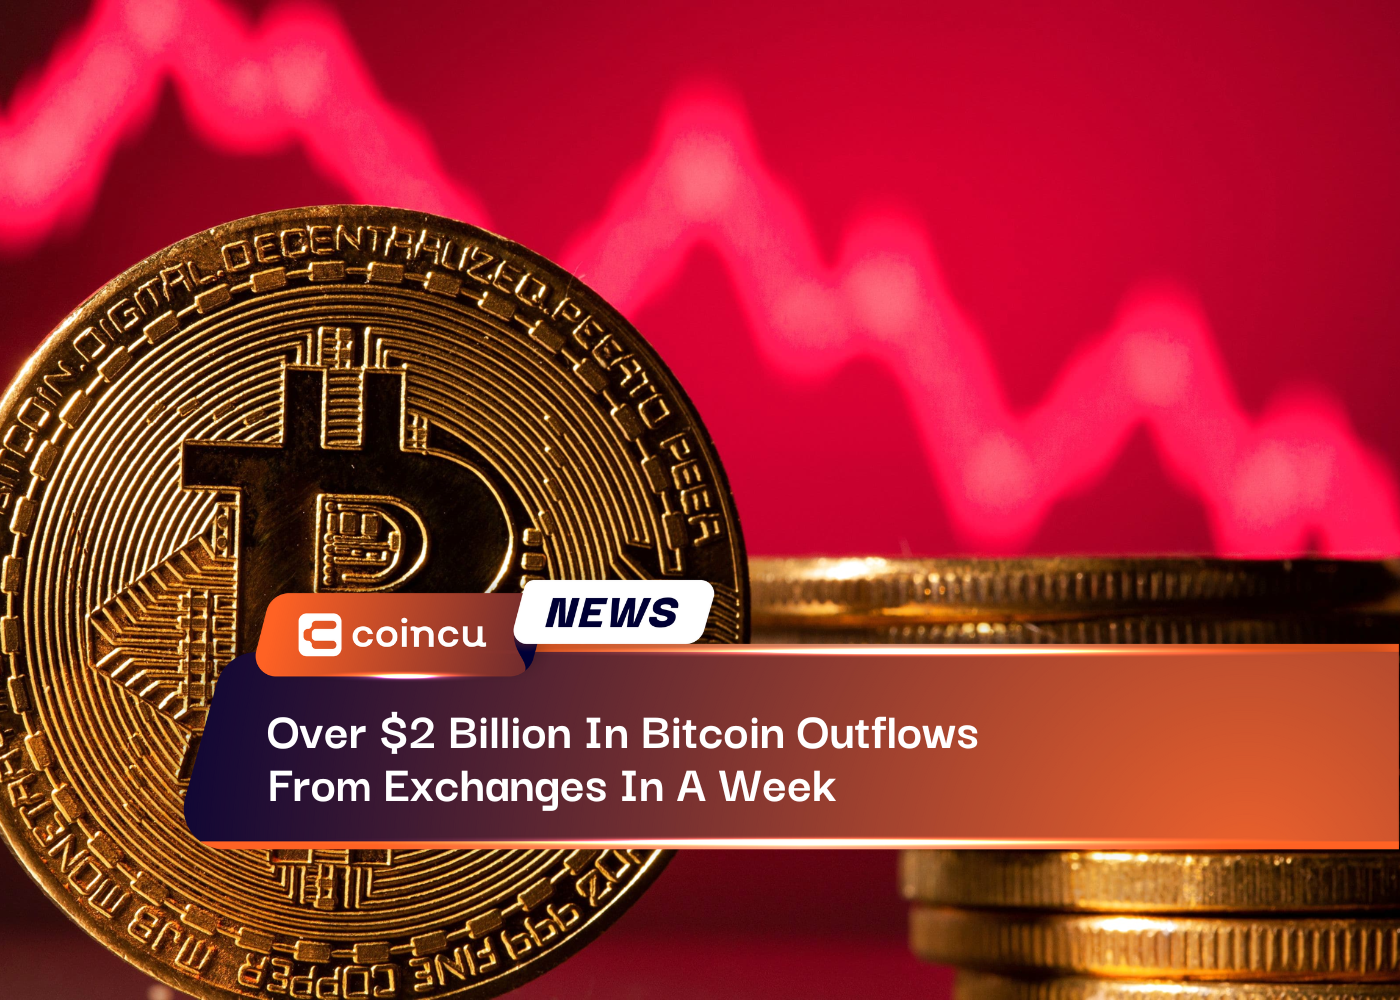 Over $2 Billion In Bitcoin Outflows From Exchanges In A Week